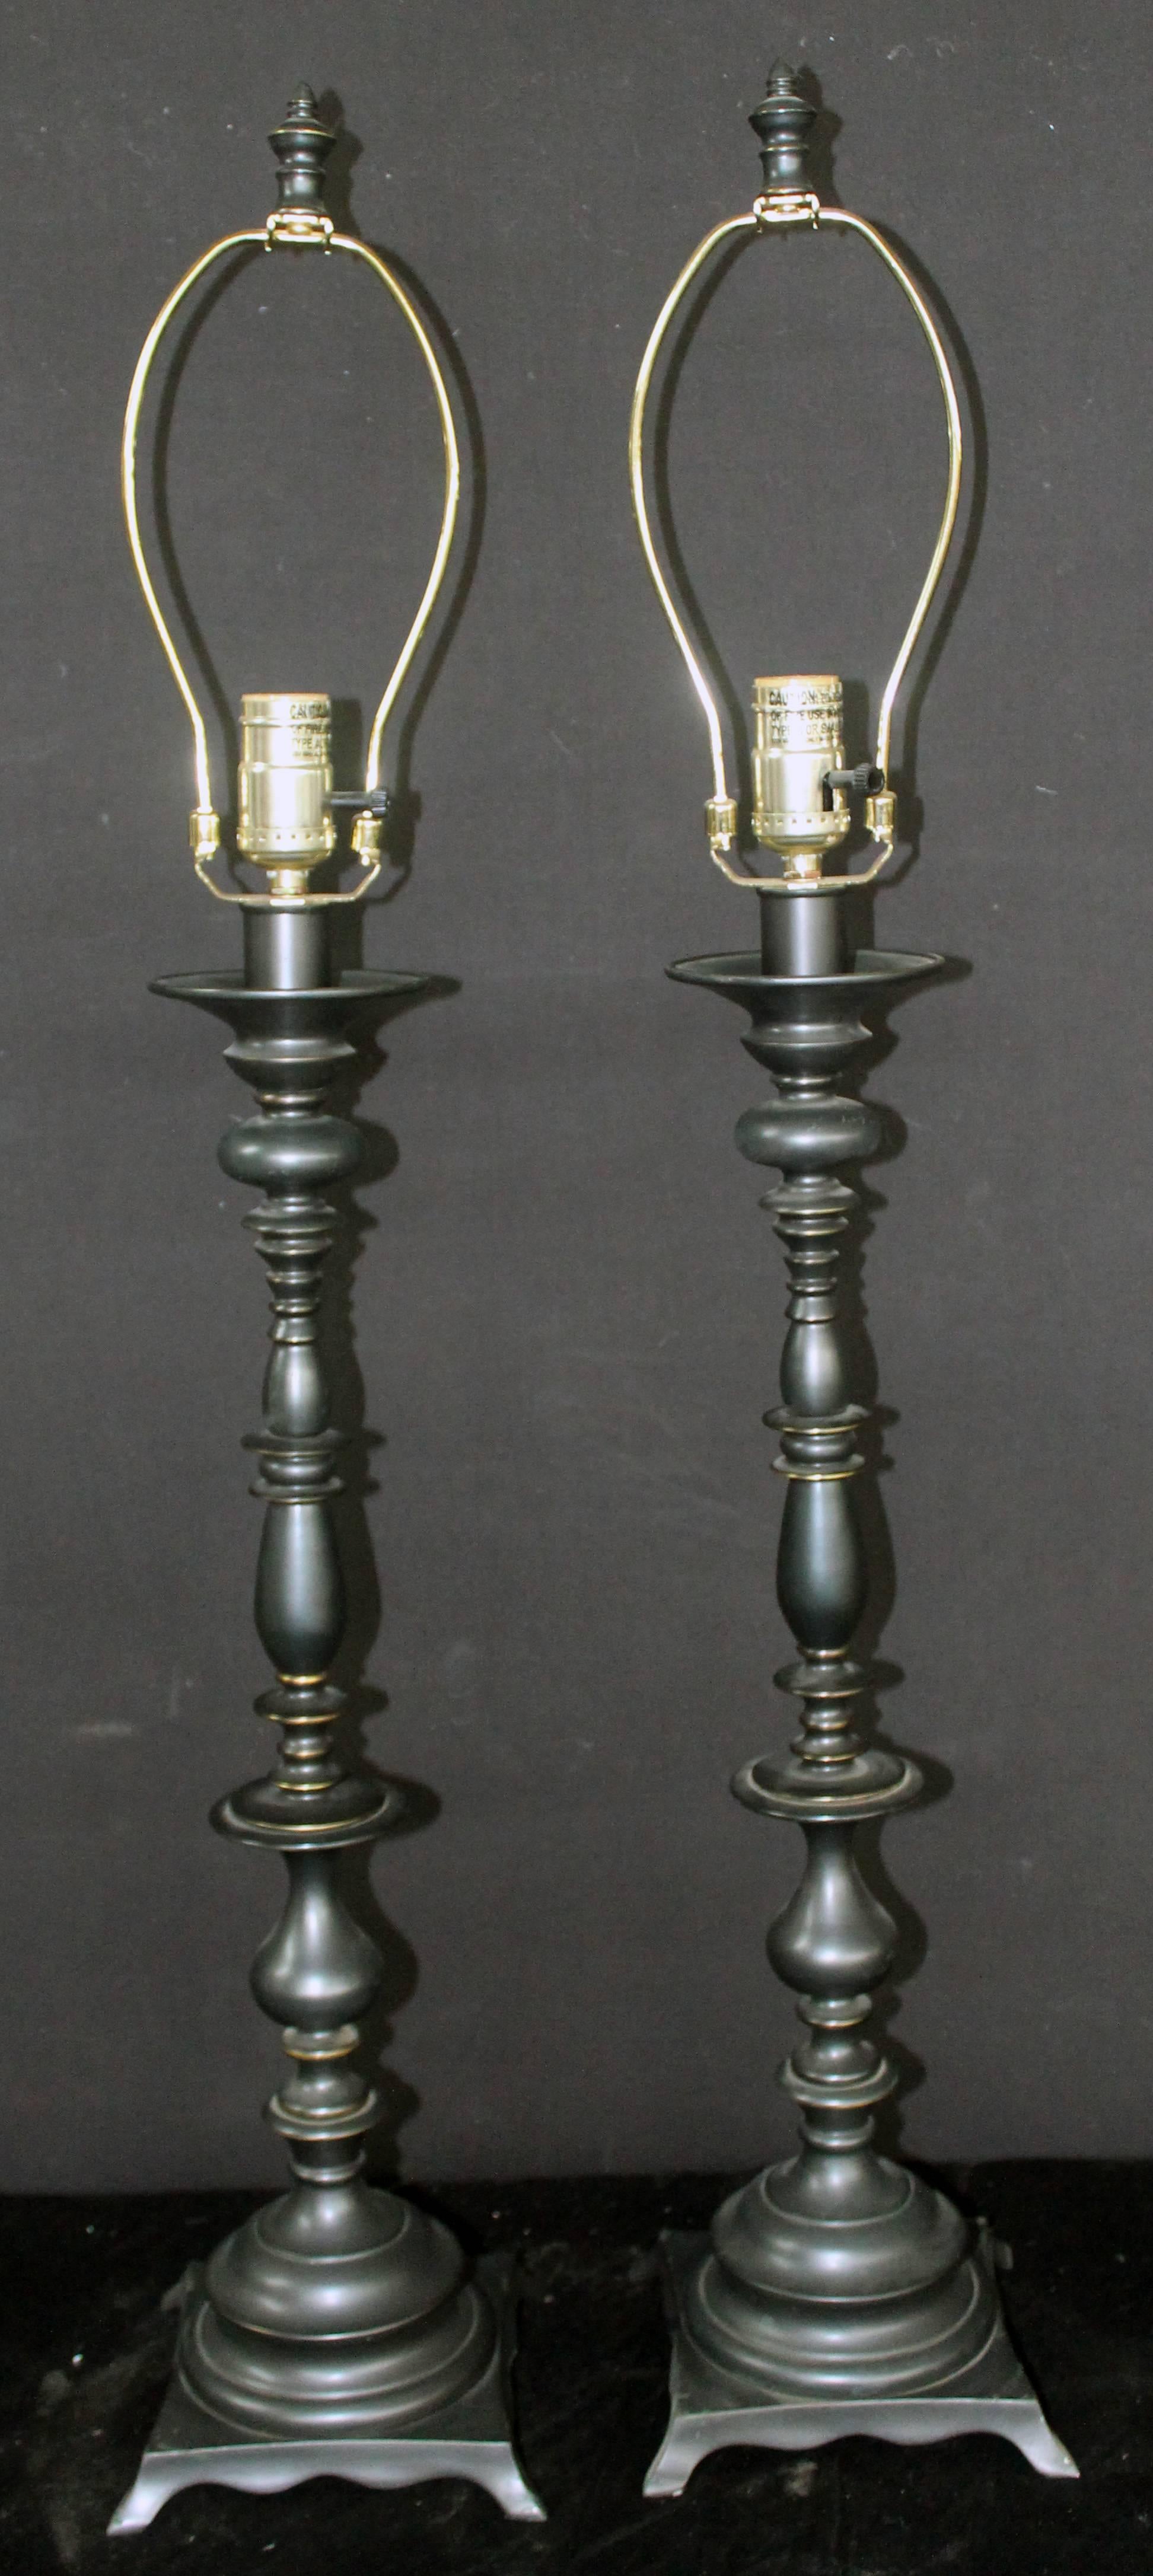 Pair of ornate traditional metal lamps.

Base is 7